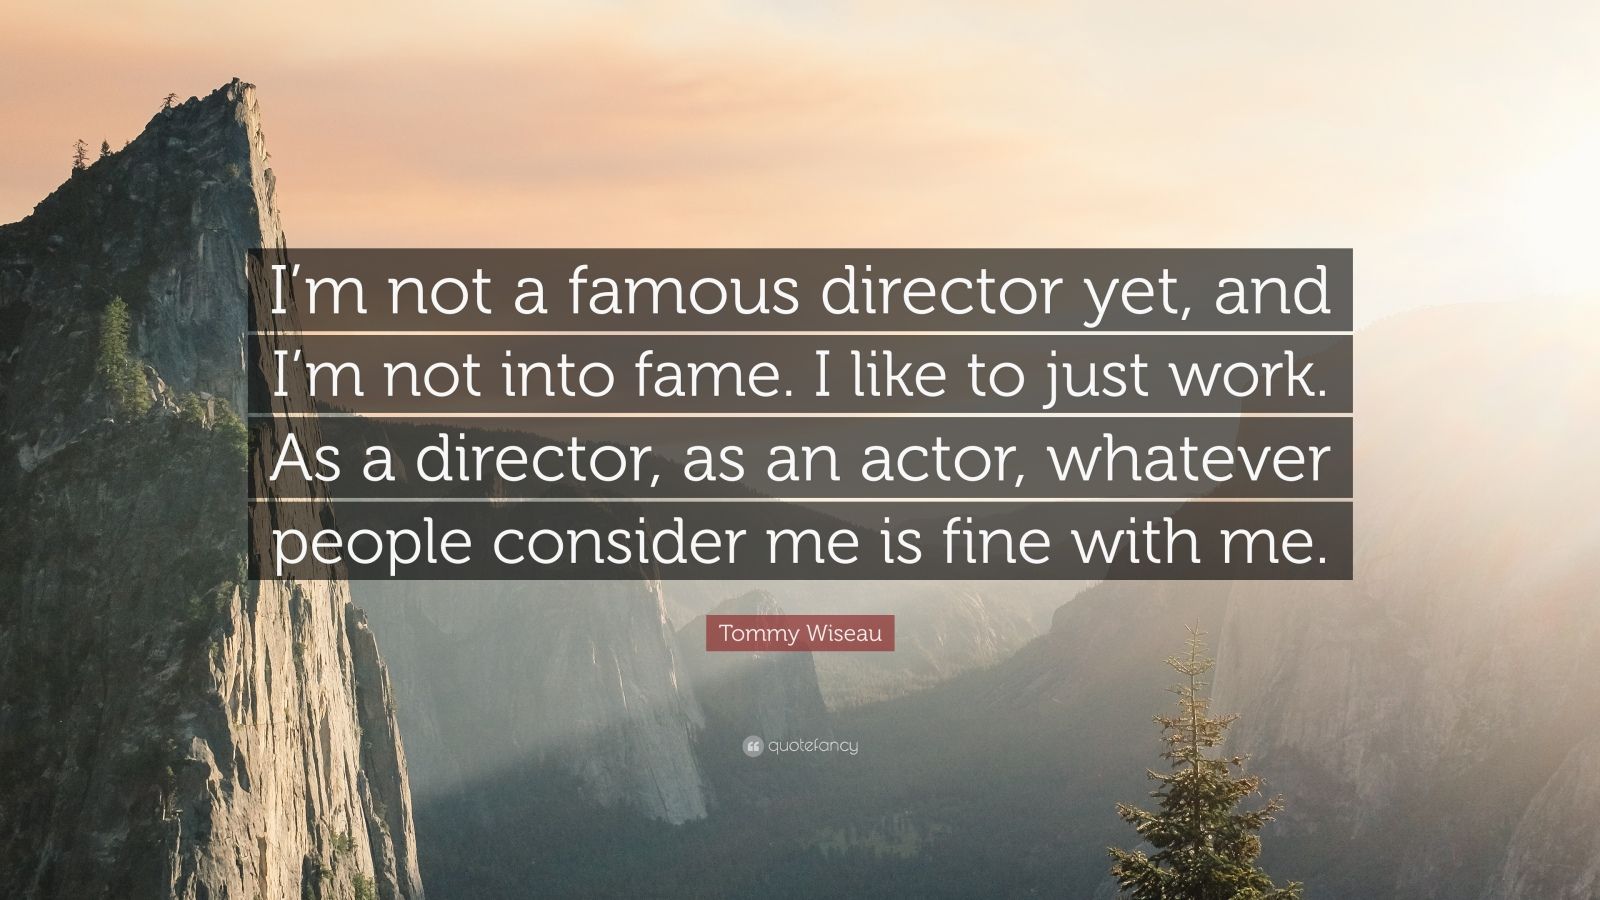 Tommy Wiseau Quote: "I'm not a famous director yet, and I'm not into fame. I like to just work ...